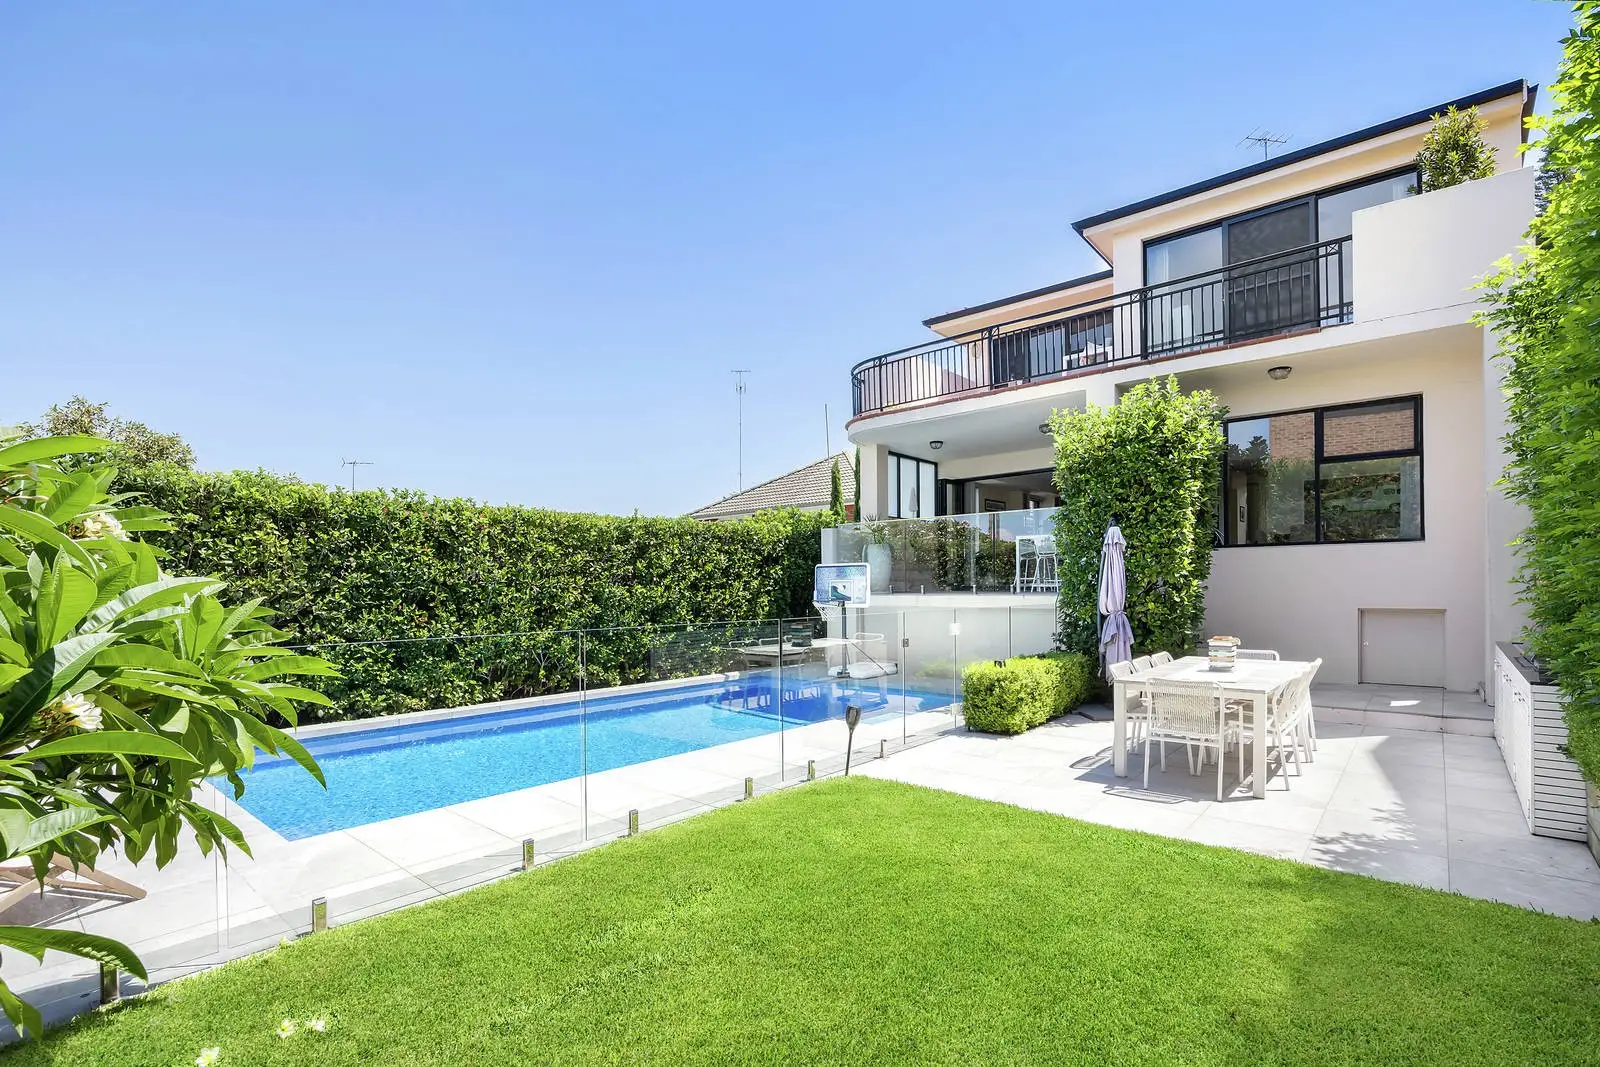 Photo #1: 379 Malabar Road, Maroubra - Sold by Sydney Sotheby's International Realty